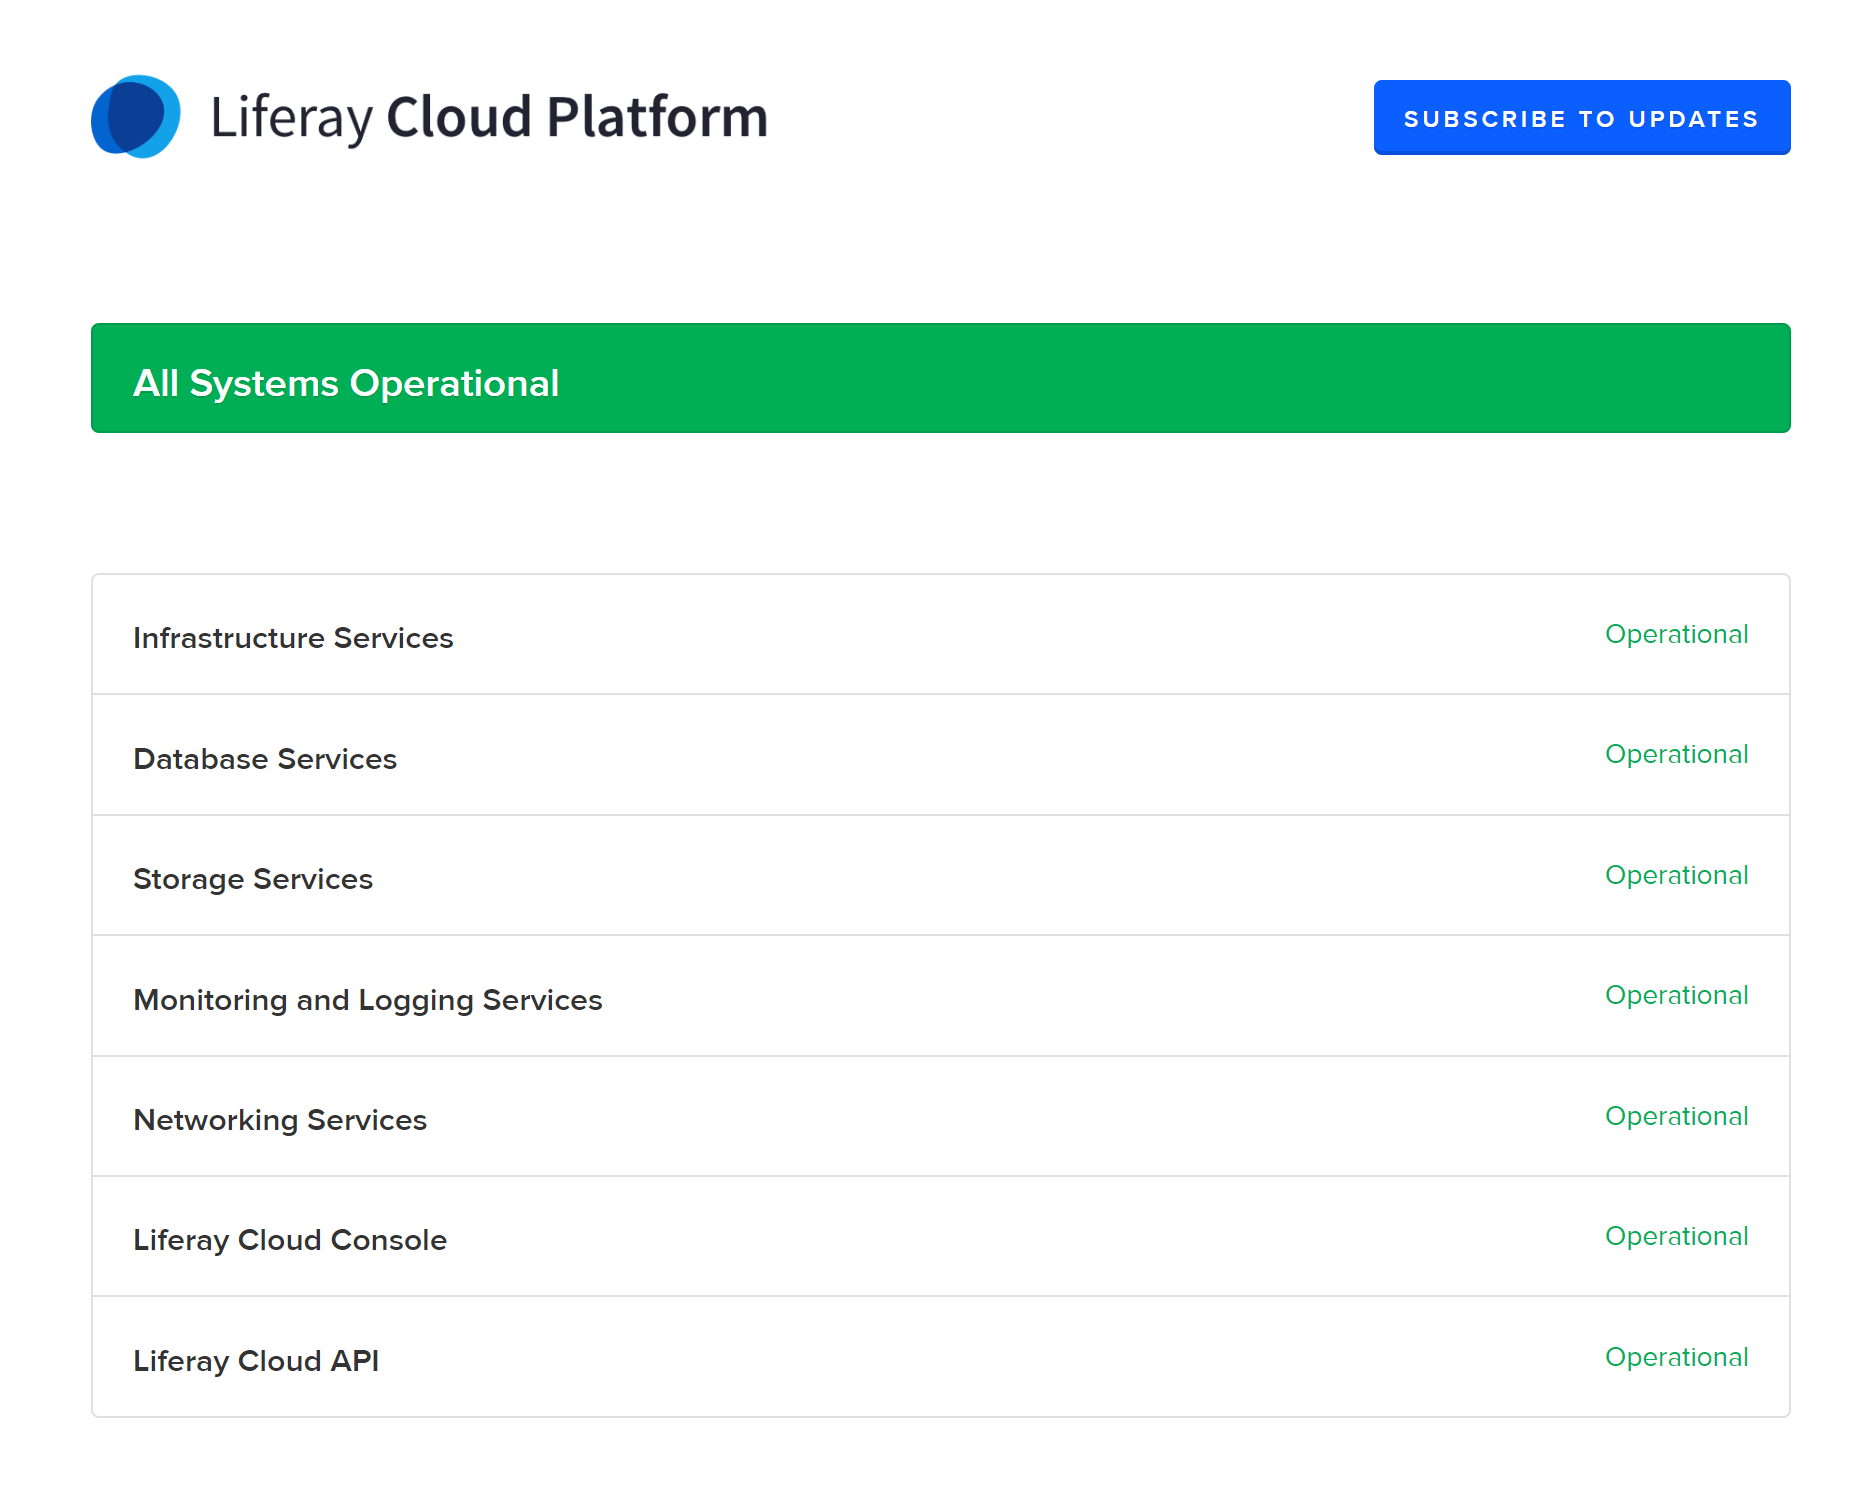 Figure 2: View the current status of Liferay Cloud Platform systems.